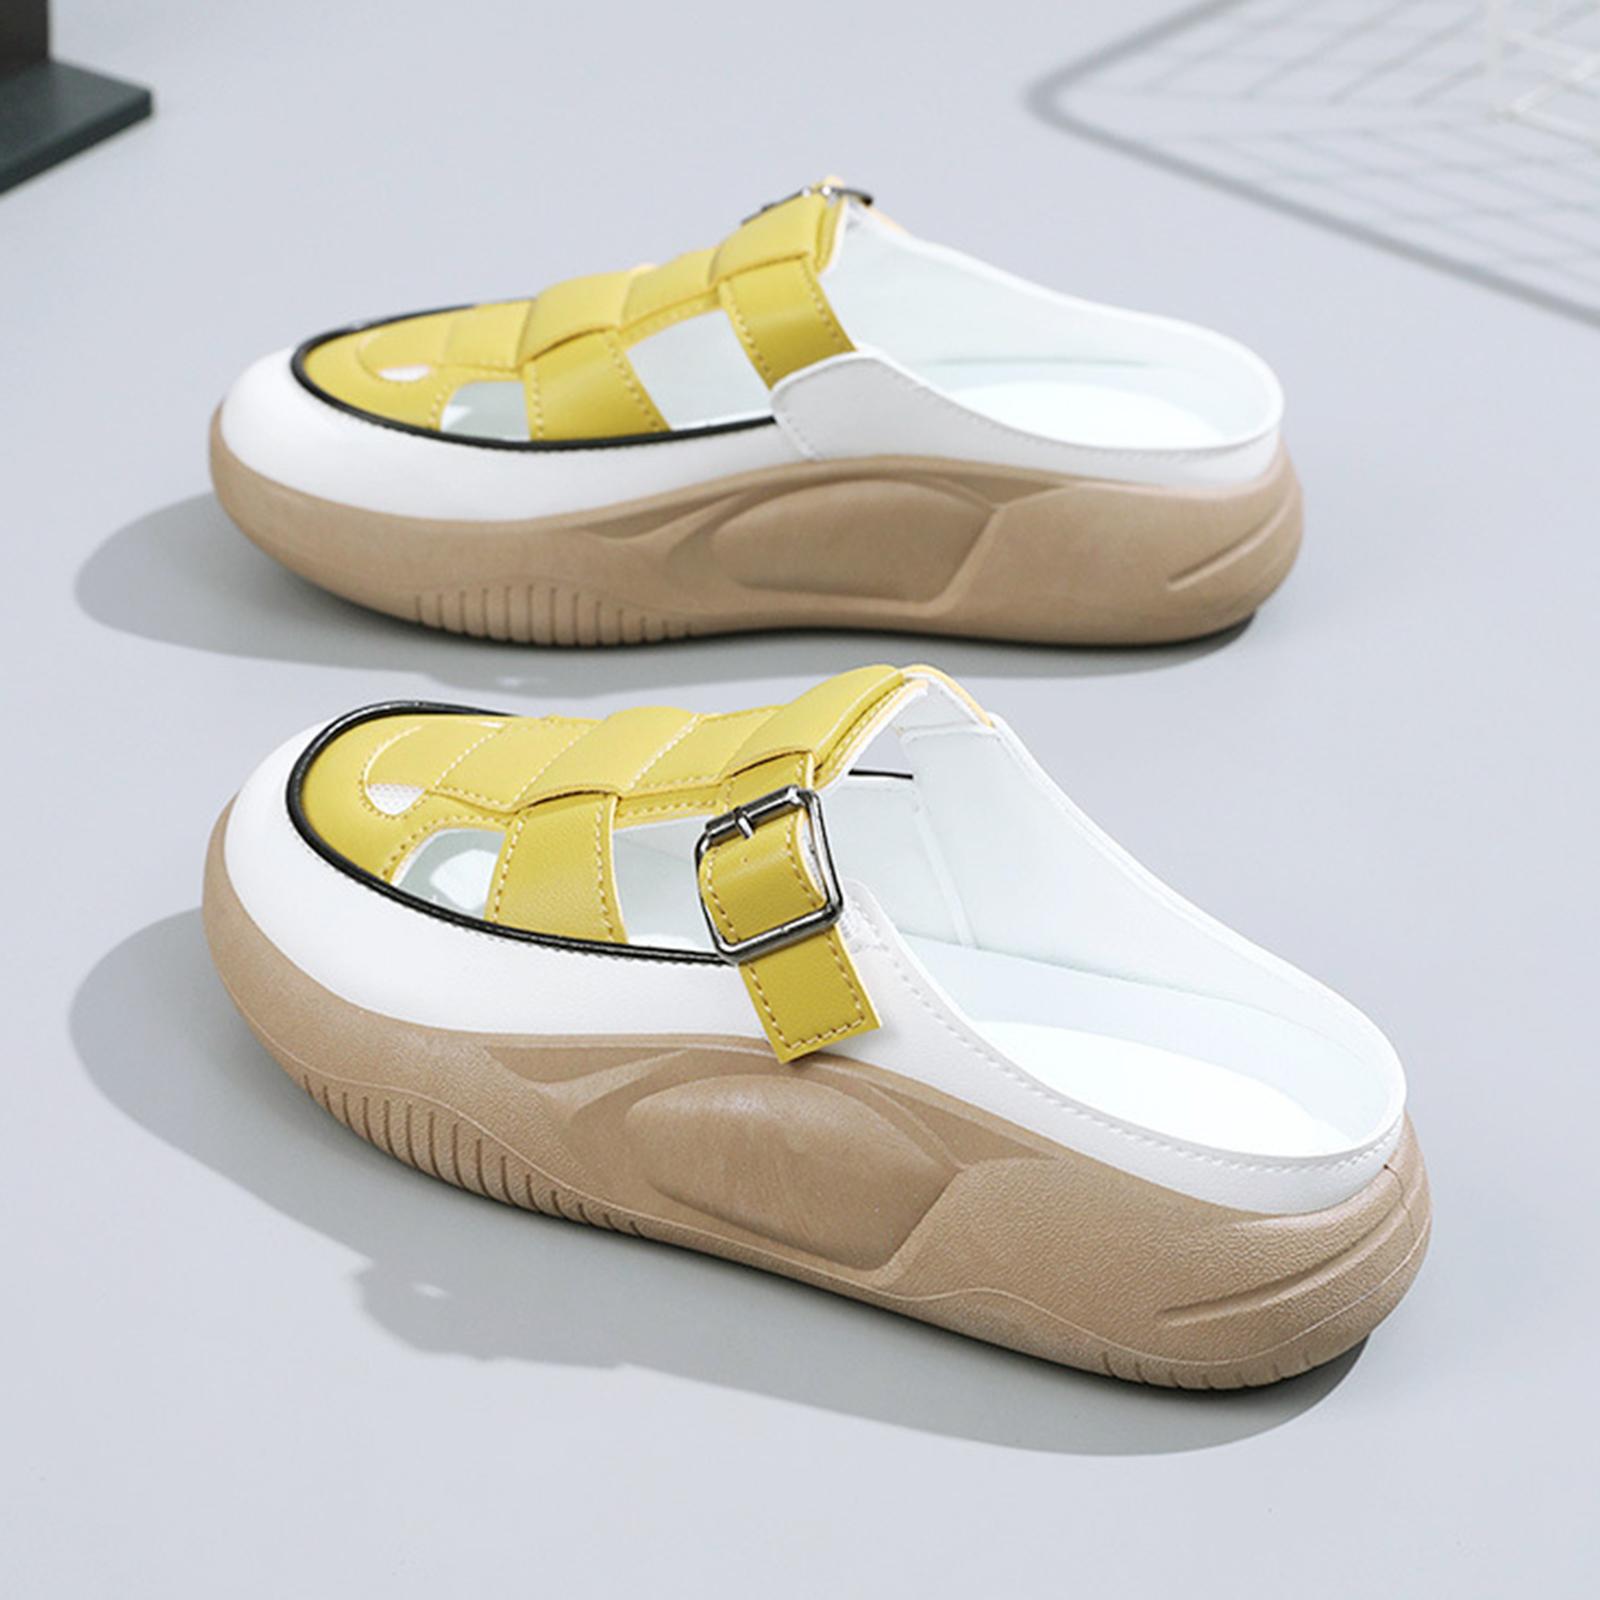 Women's Slide Sandals Comfortable Flat Shoes 5cm Thick Sole Nonslip Slippers Yellow 39